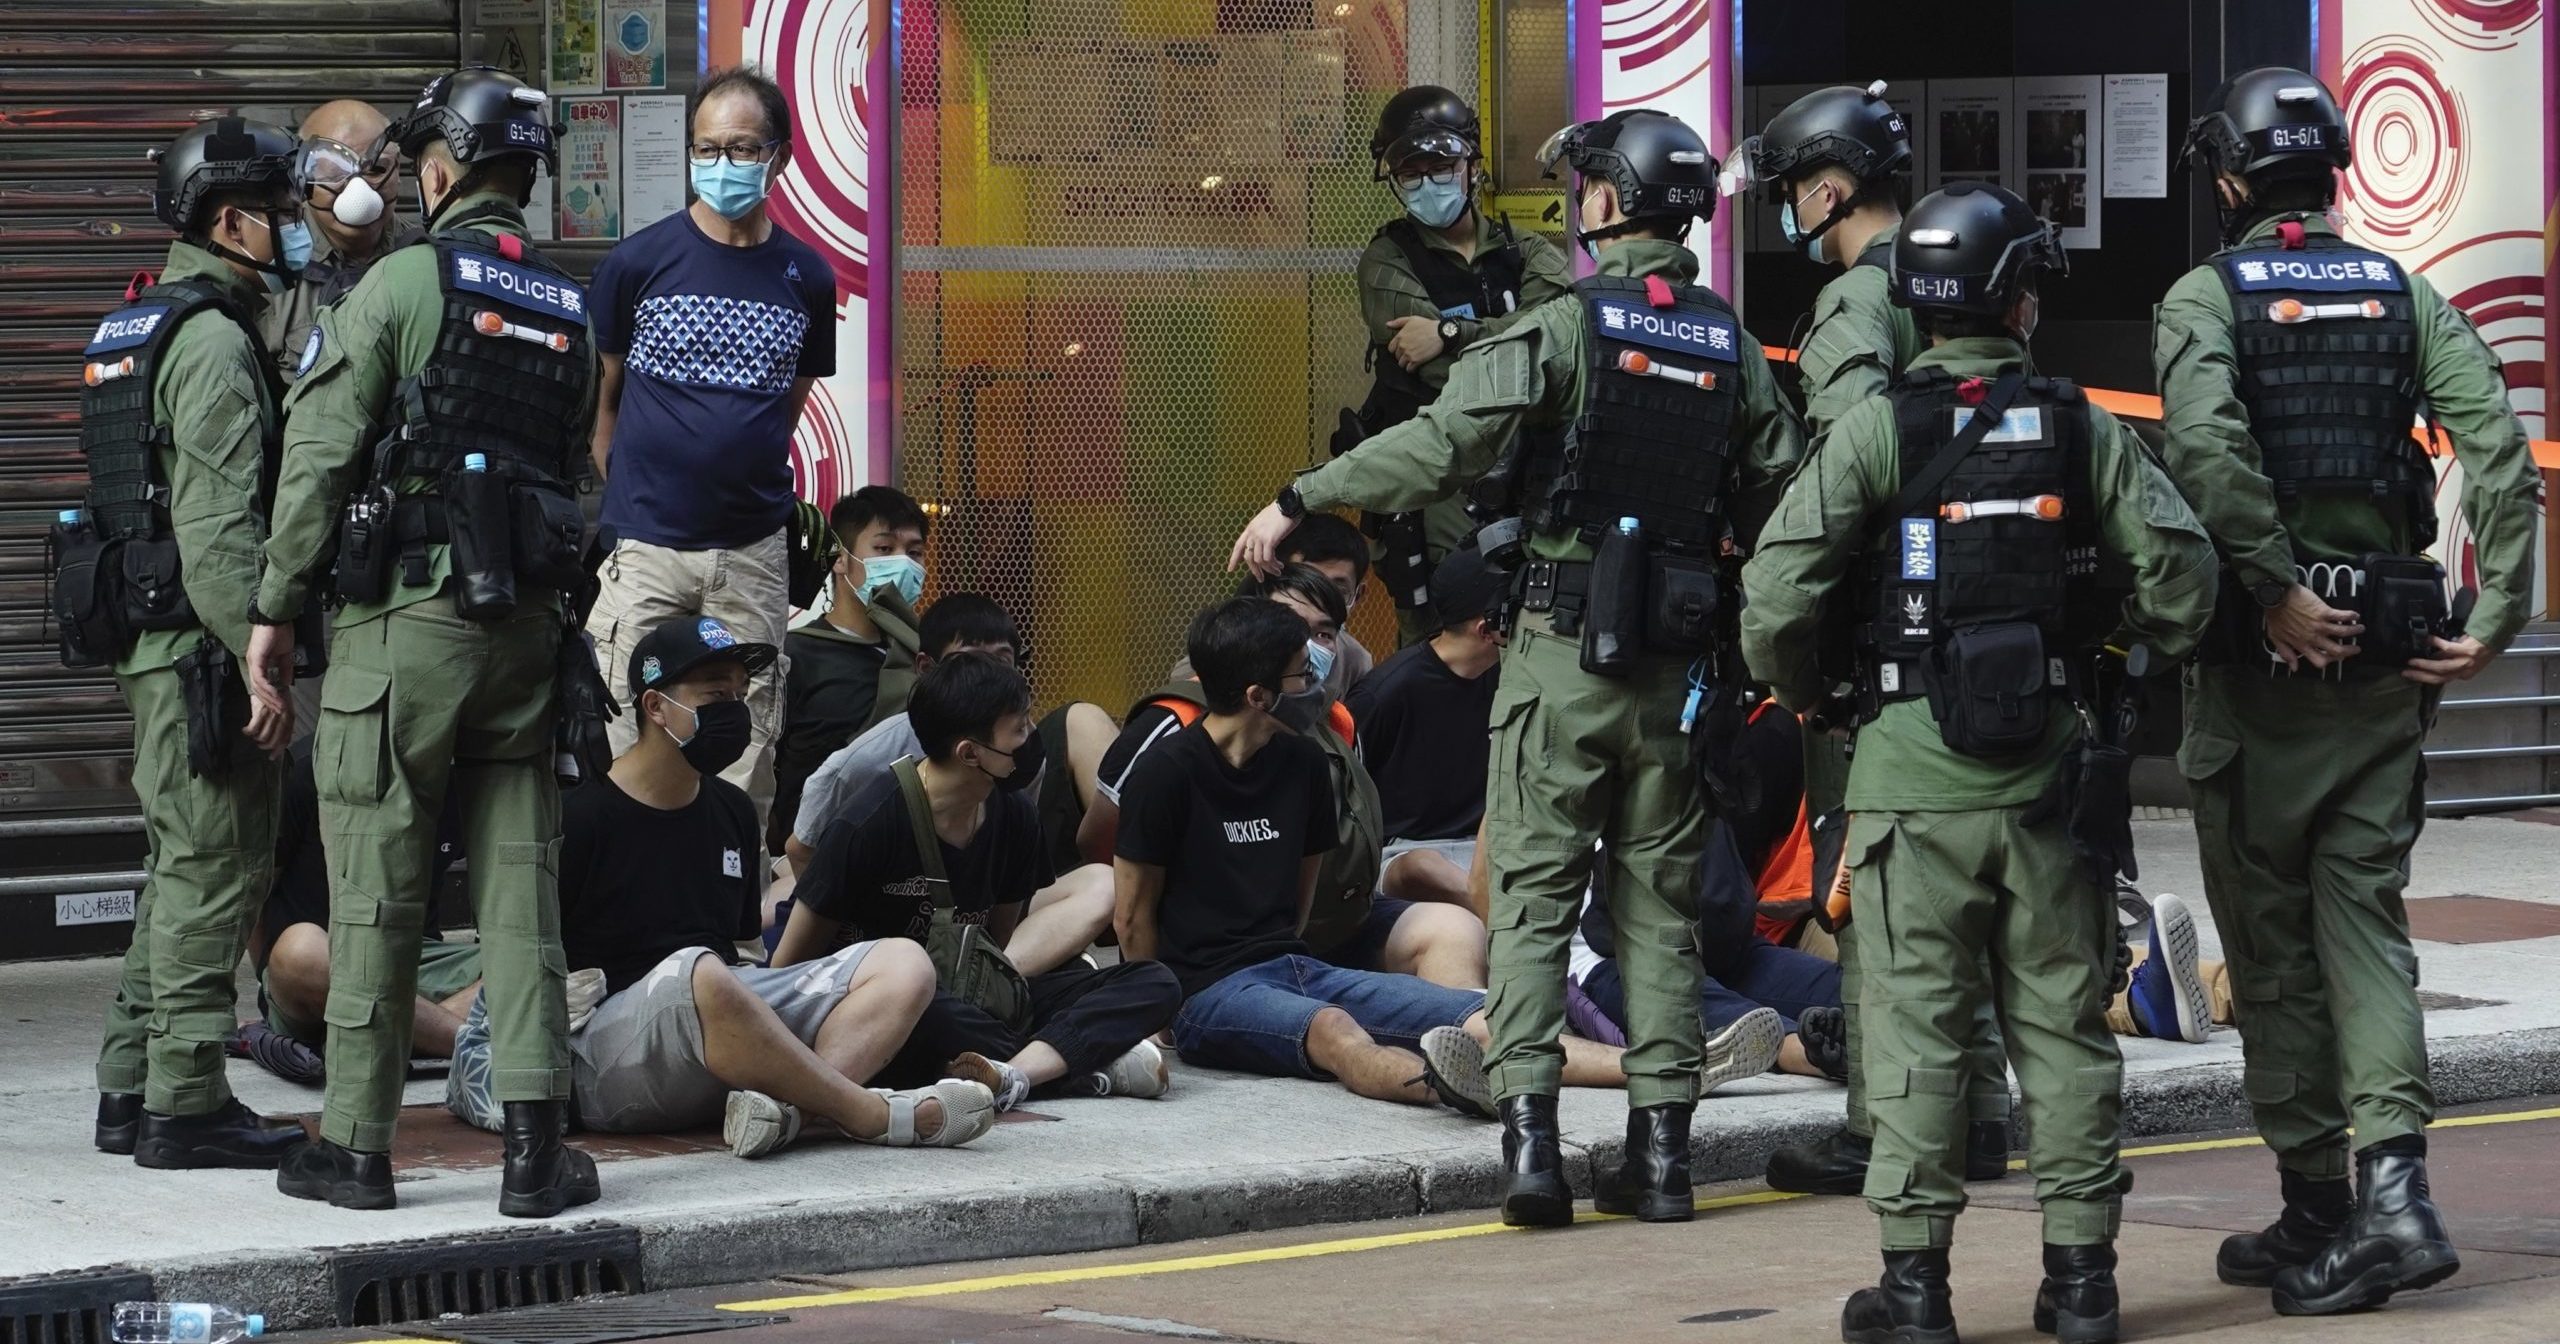 People are arrested by police officers in Hong Kong on Sep. 6, 2020. About 300 people were arrested at protests against the government's decision to postpone elections for Hong Kong's legislature, police and a news report said.